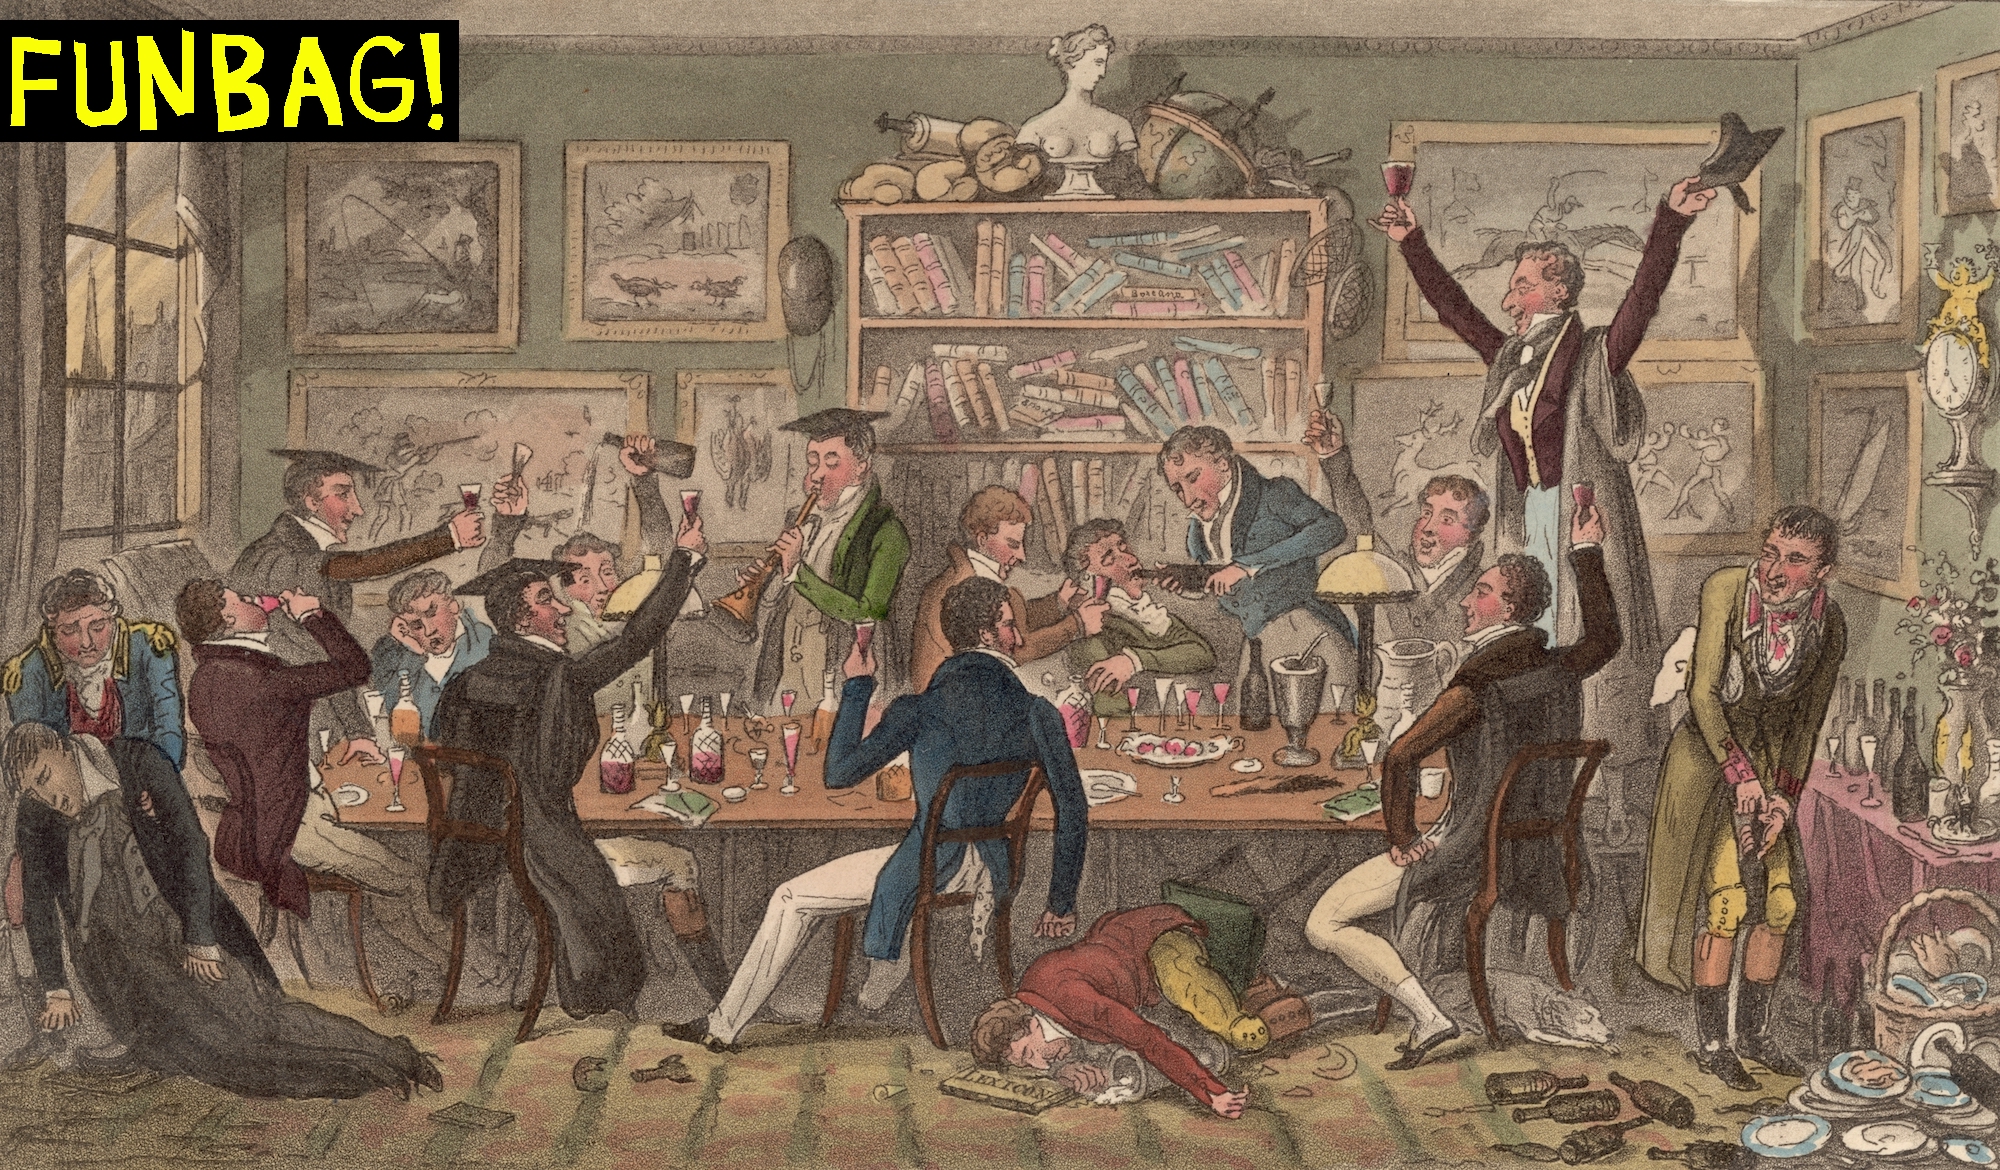 1824: Oxford undergraduates on a latenight drinking escapade. The original caption reads 'Oxford Transports or Albanians doing Penance for Past Offences'. Original Artwork: Drawn and engraved by Robet Cruikshank for 'The English Spy', 1824 (Photo by Hulton Archive/Getty Images)